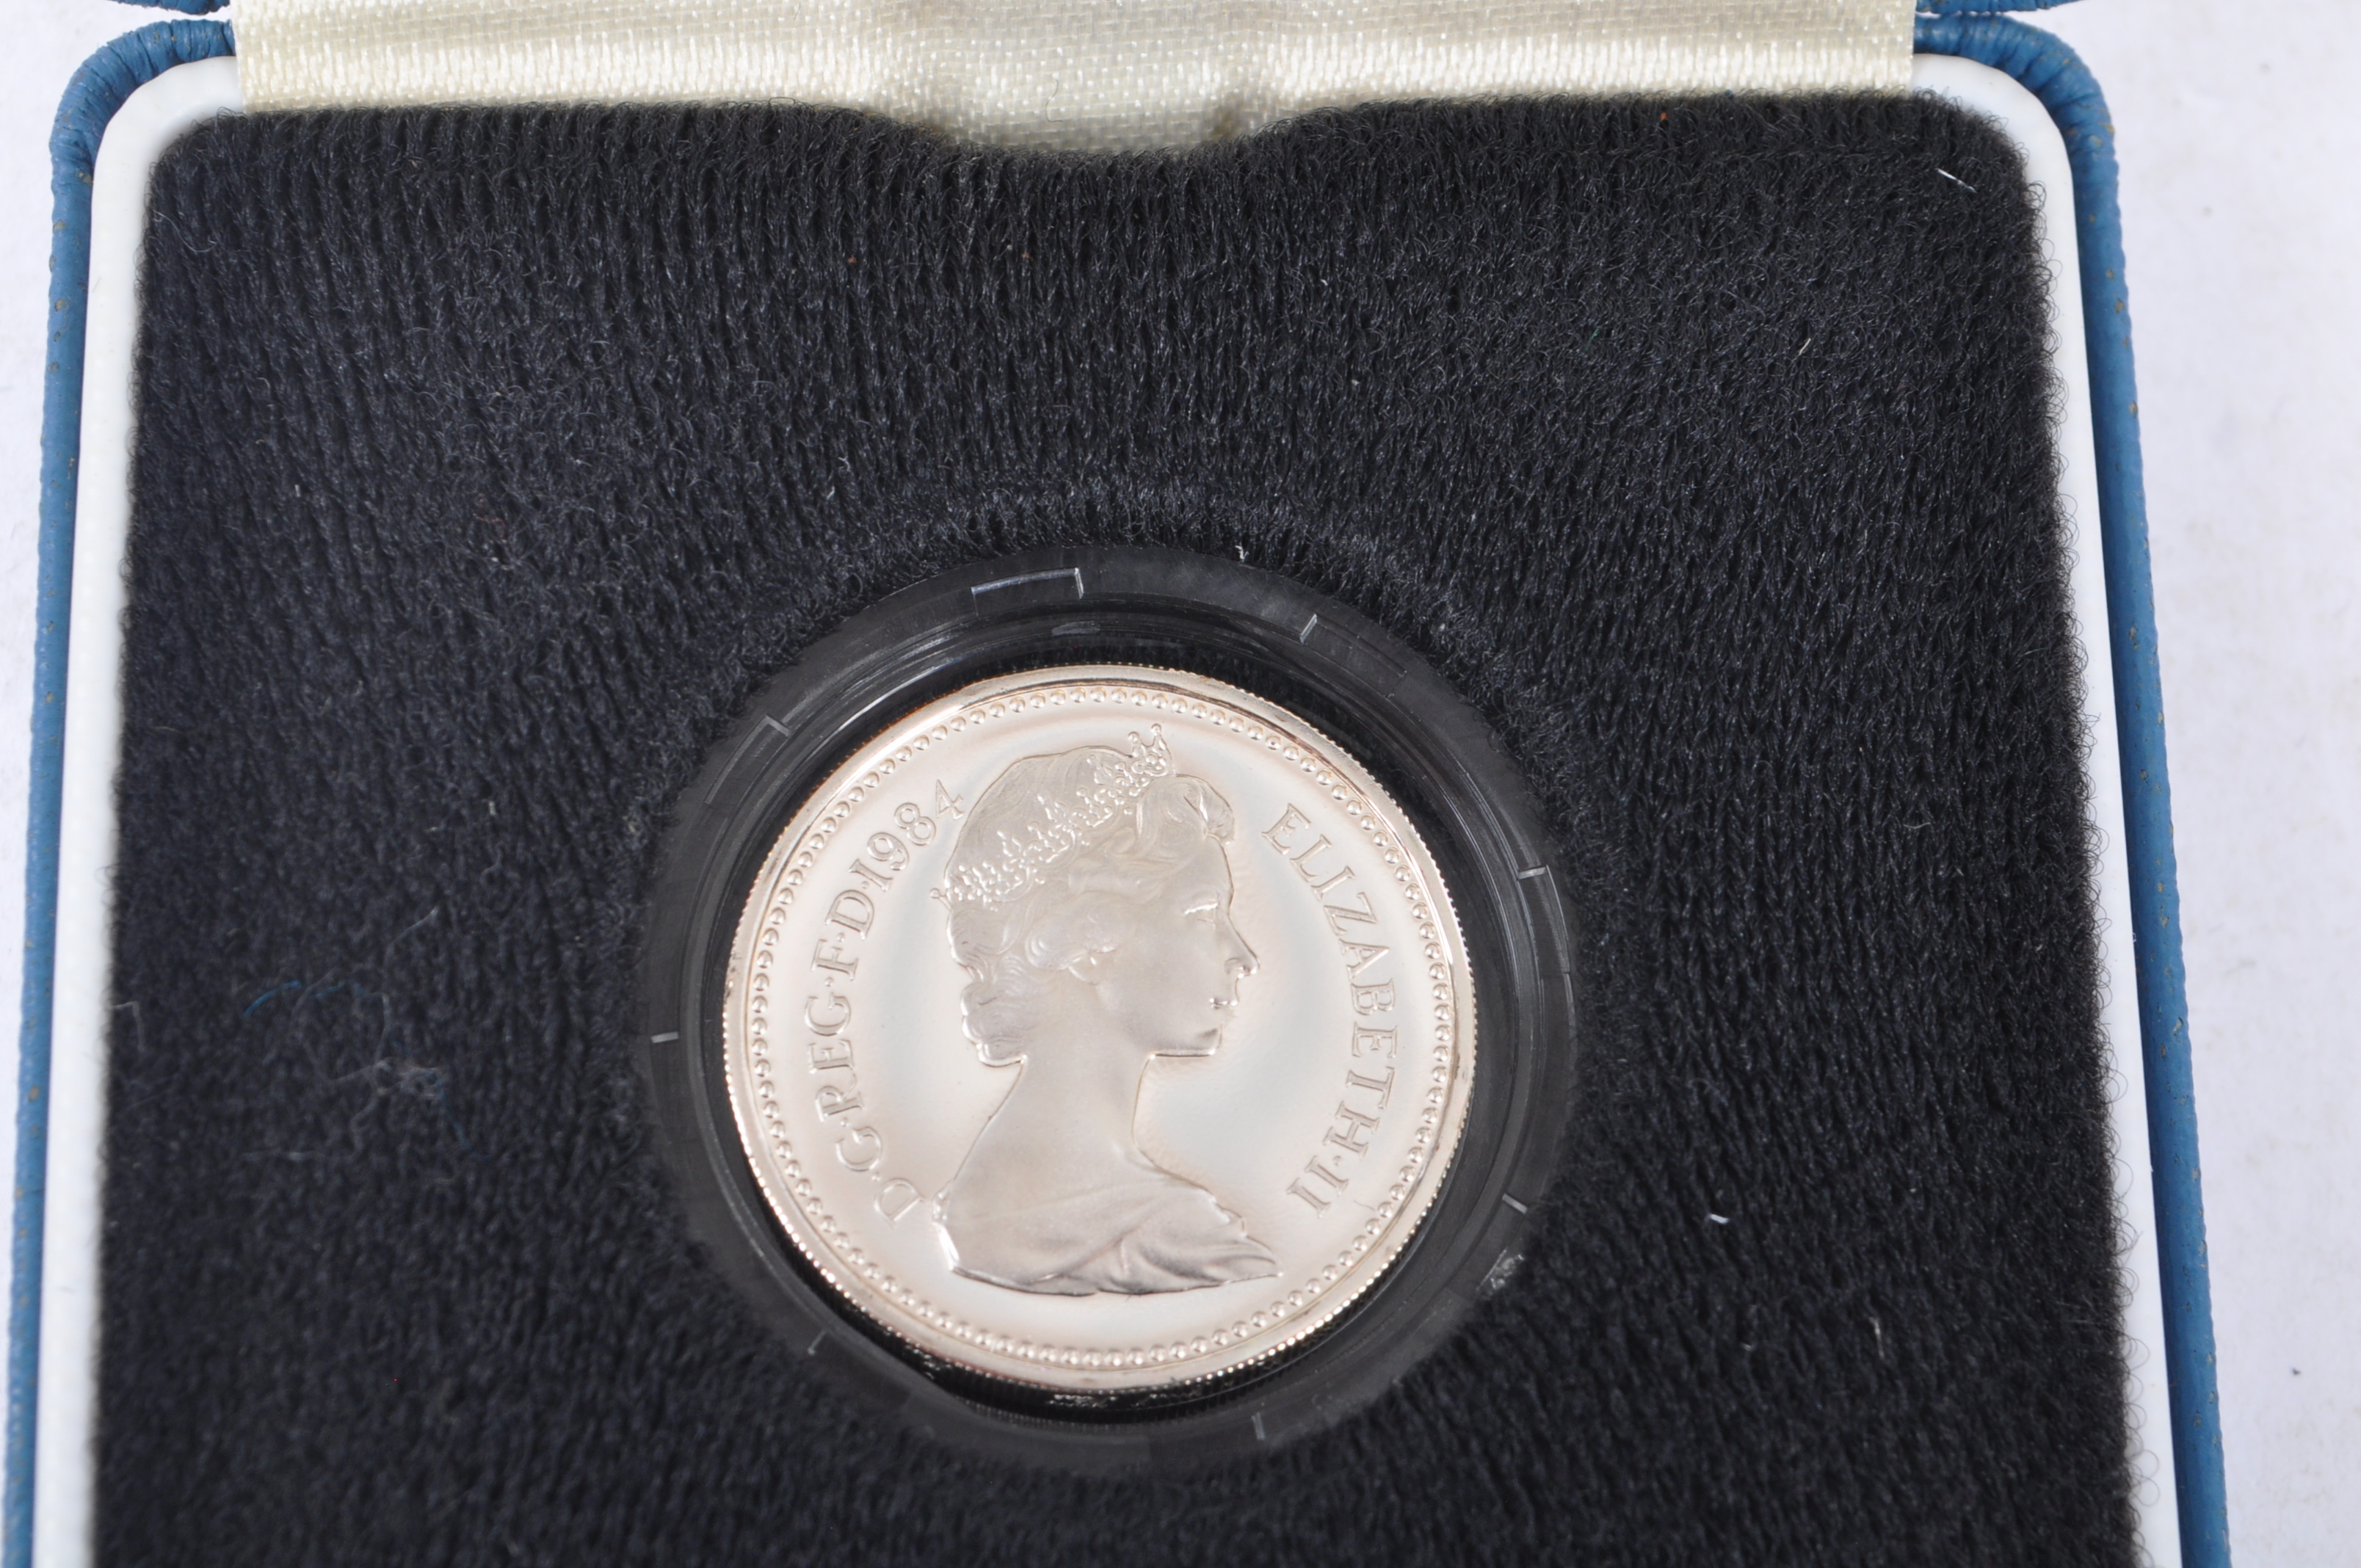 THE ROYAL MINT - UNITED KINGDOM - GROUP OF SILVER PROOF COINS - Image 5 of 9